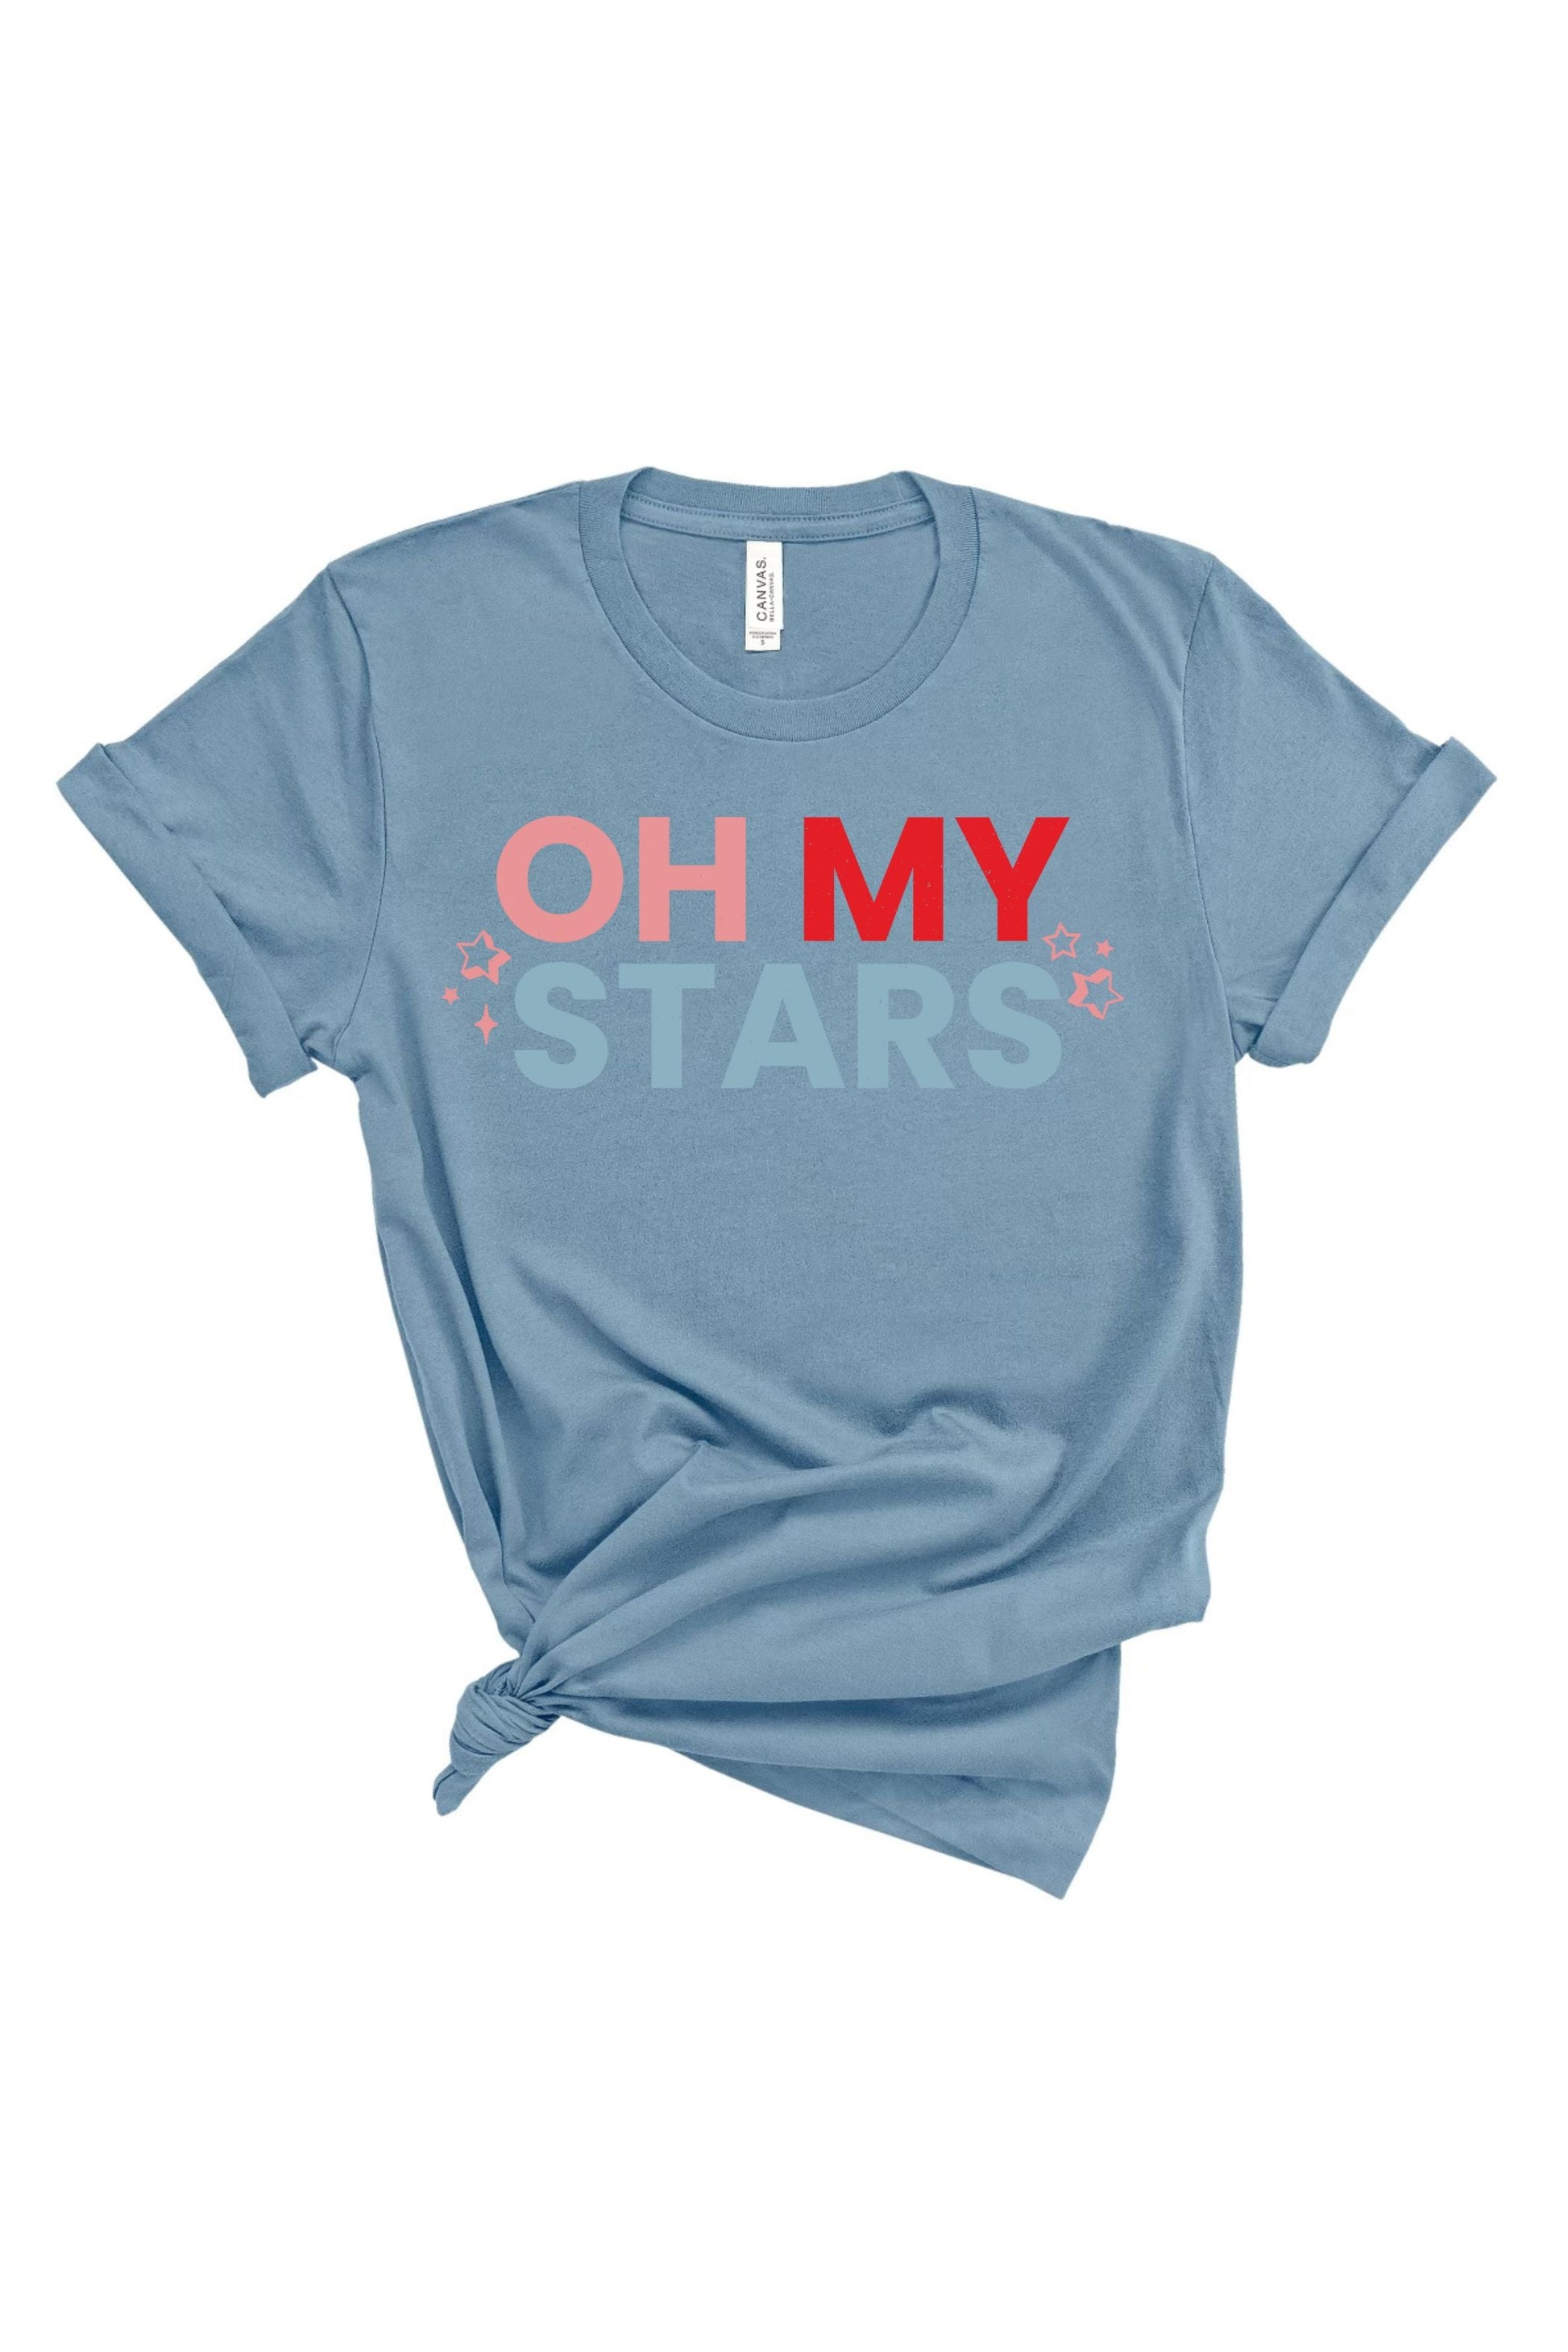 Oh My Stars | Adult Tee | RTS-Sister Shirts-Sister Shirts, Cute & Custom Tees for Mama & Littles in Trussville, Alabama.